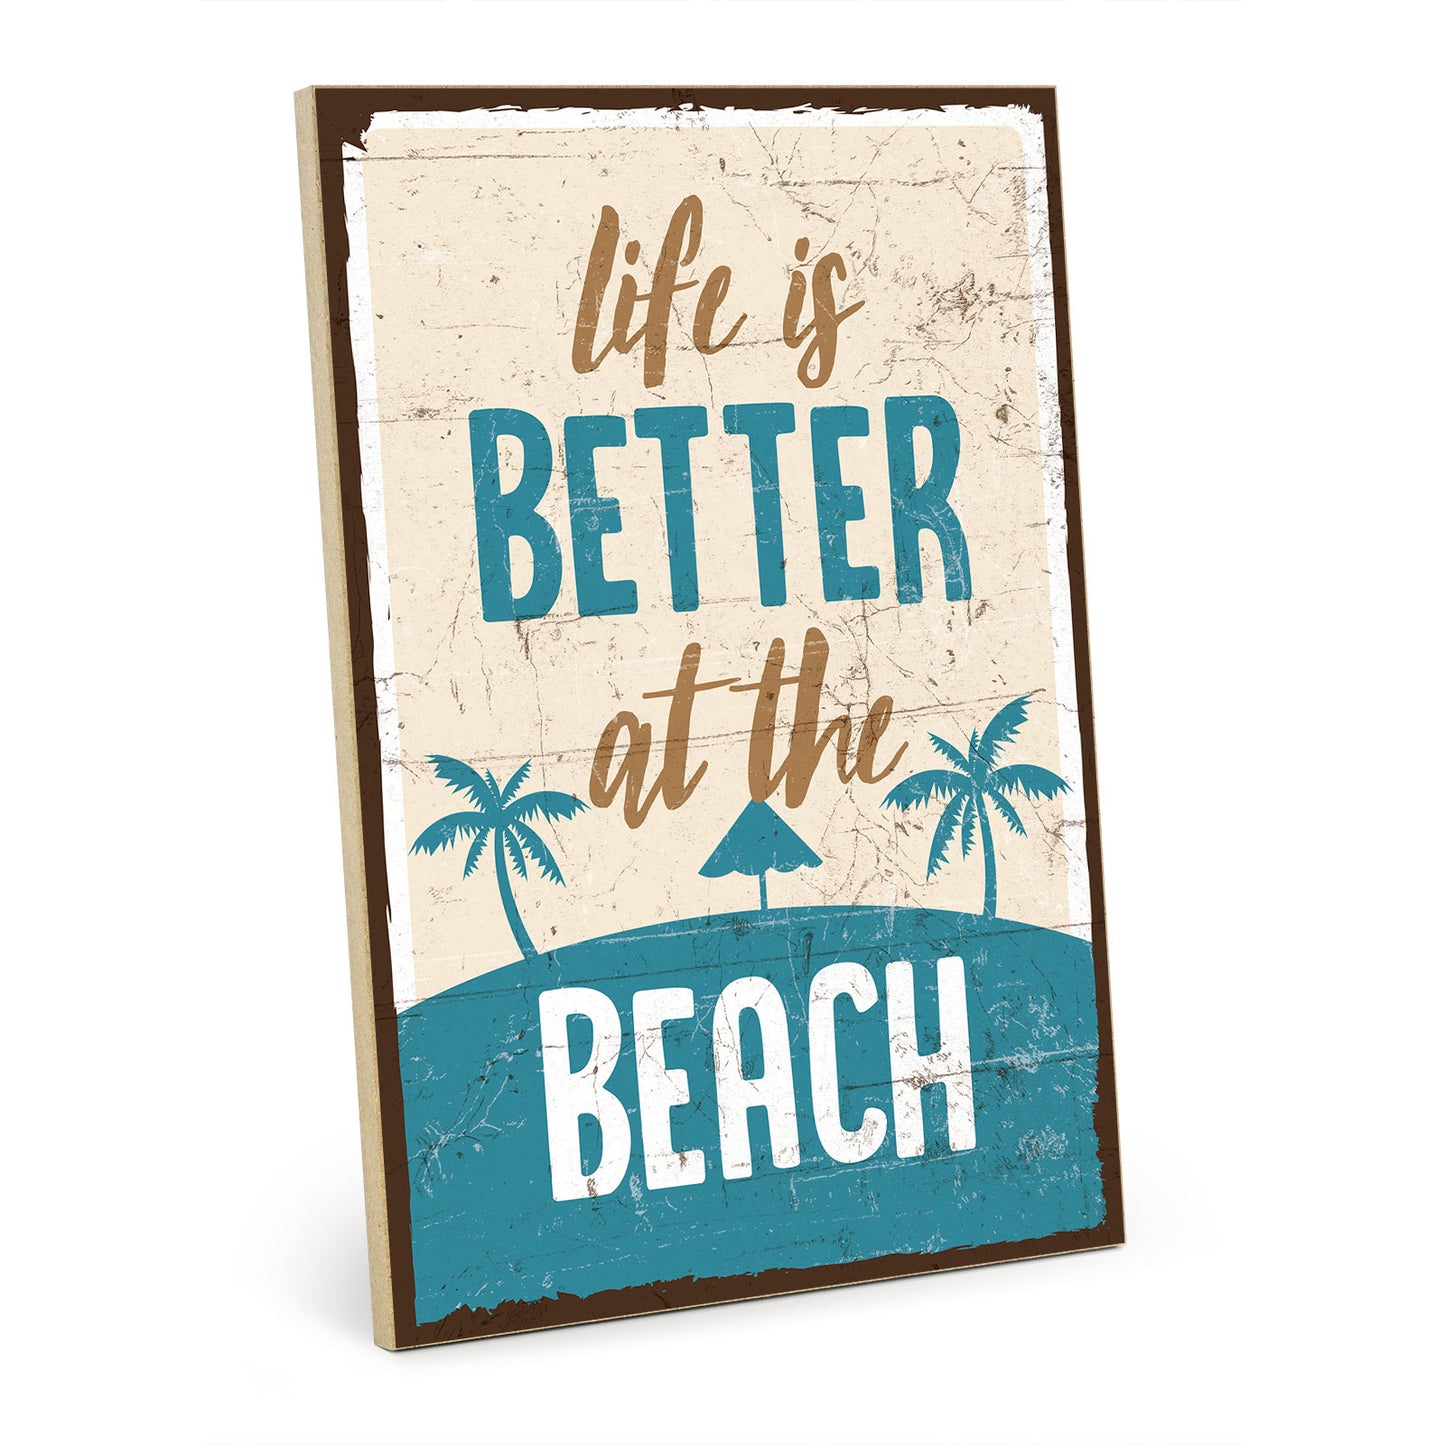 Holzschild mit Spruch - Life is better at the beach – HS-GH-00136